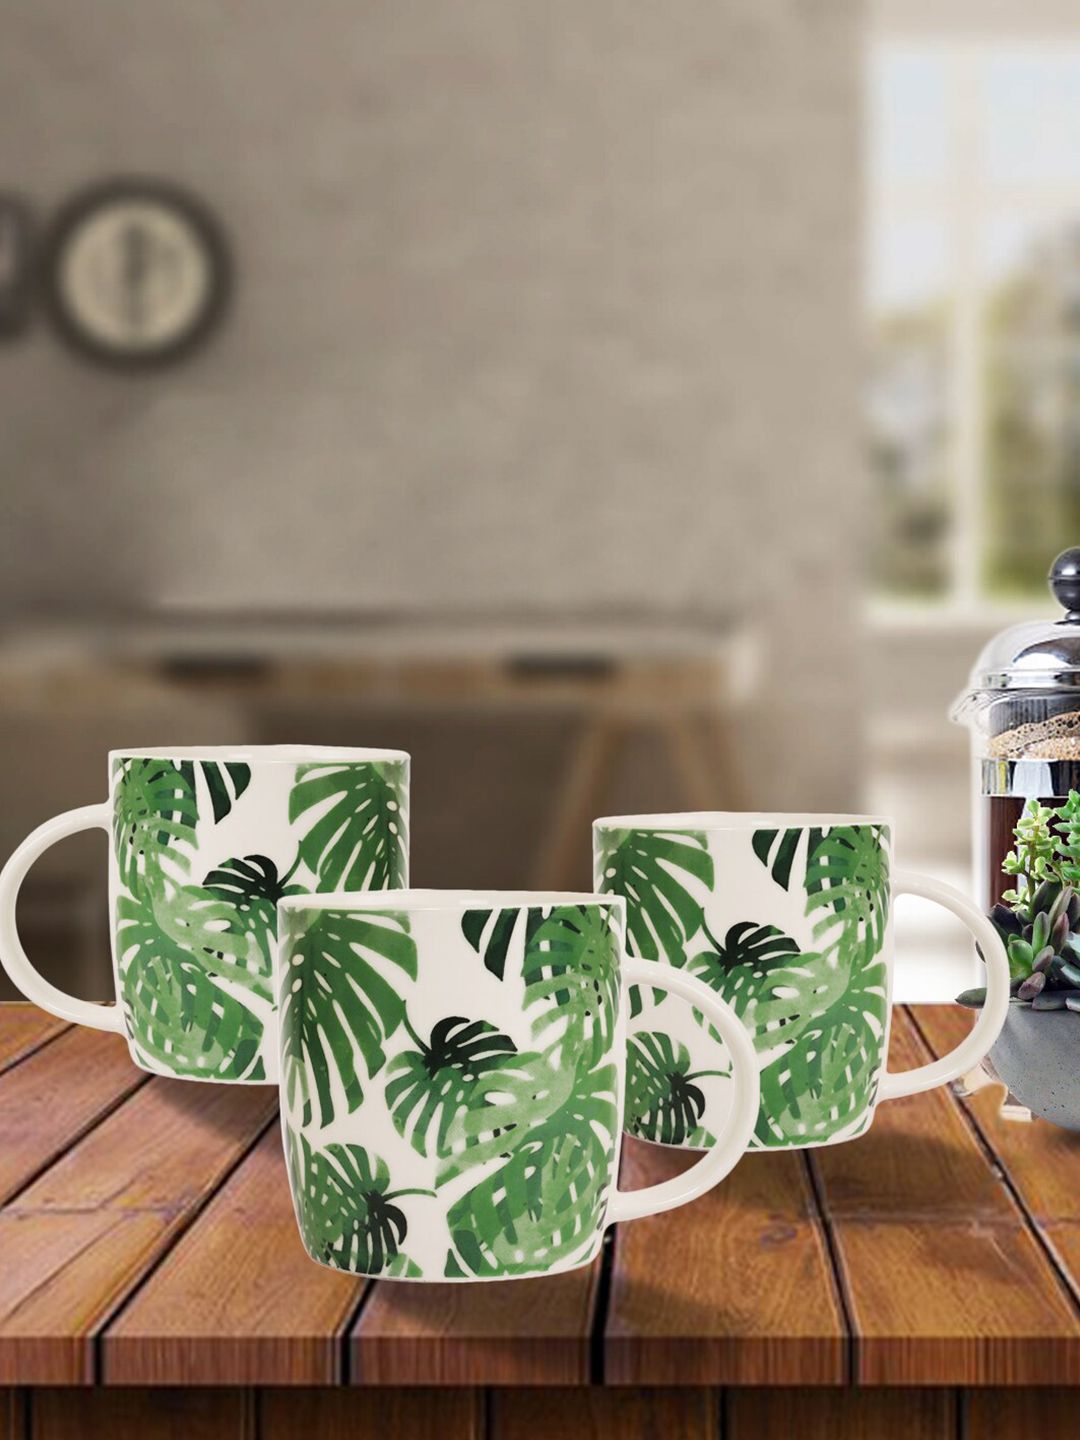 House Of Accessories Green & White Floral Printed Ceramic Glossy Mugs Set of Cups and Mugs Price in India